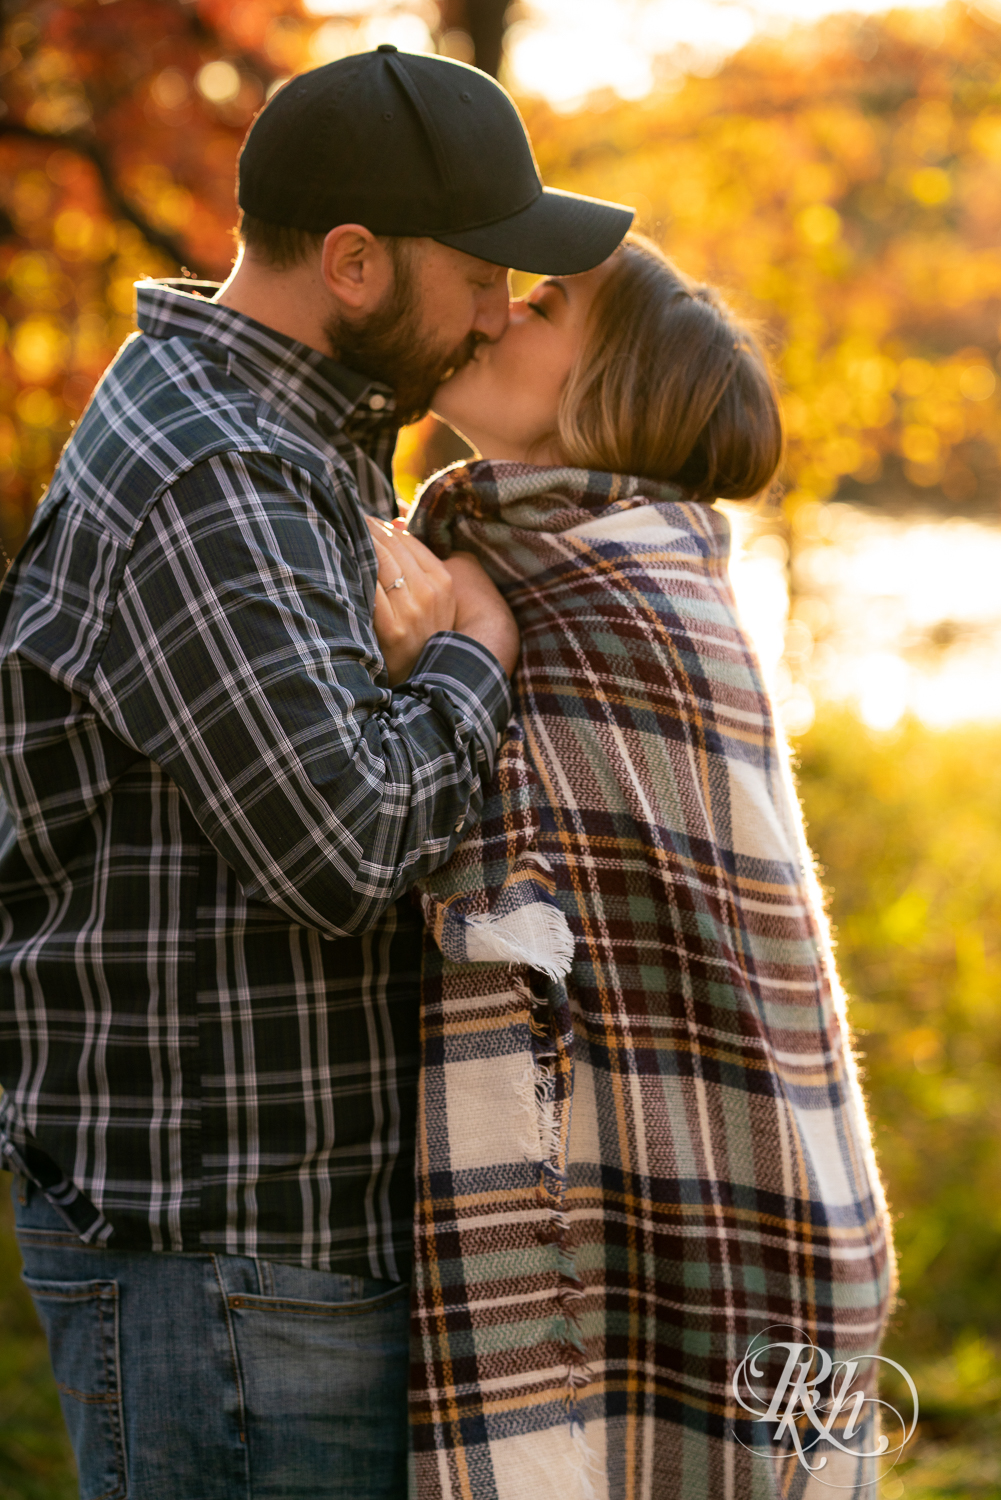 Man in flannel and woman in jeans and sweater kissing in field during sunset in Eagan, Minnesota.